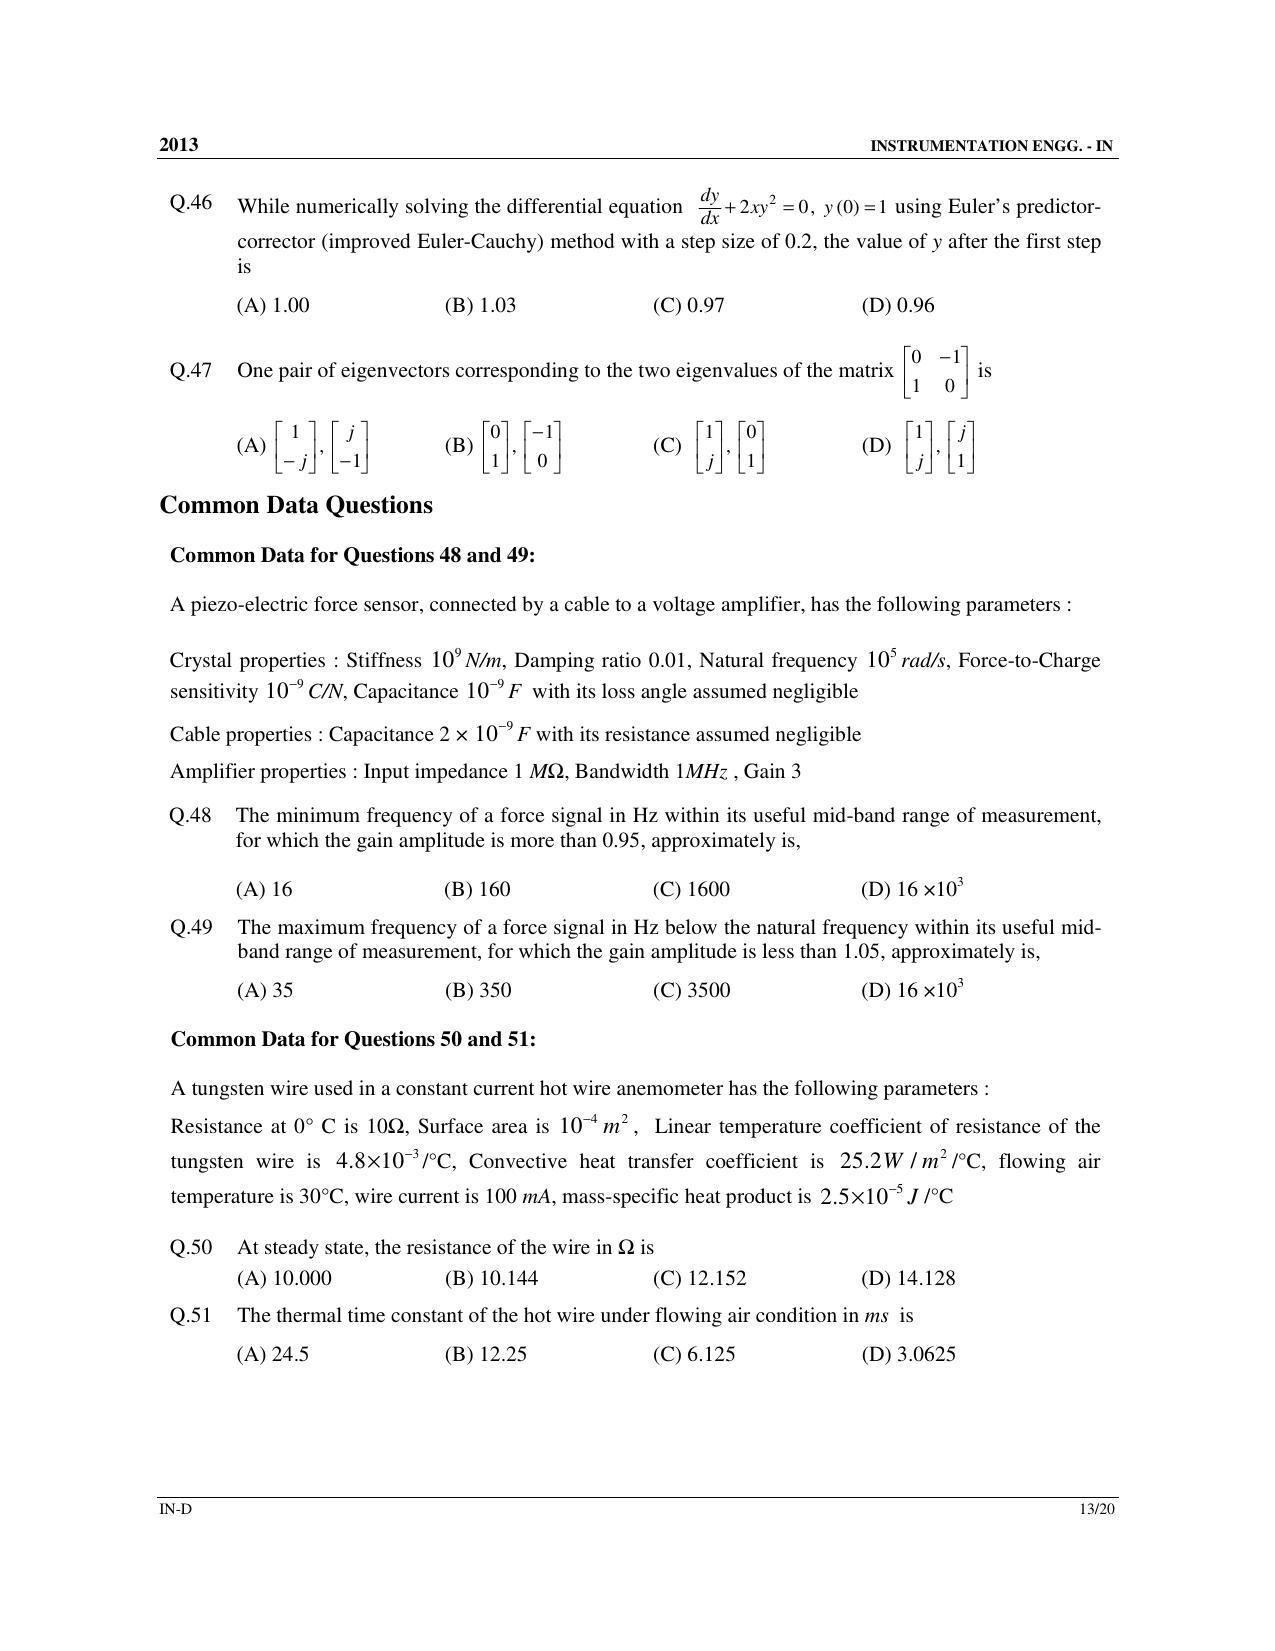 GATE 2013 Instrumentation Engineering (IN) Question Paper with Answer Key - Page 65